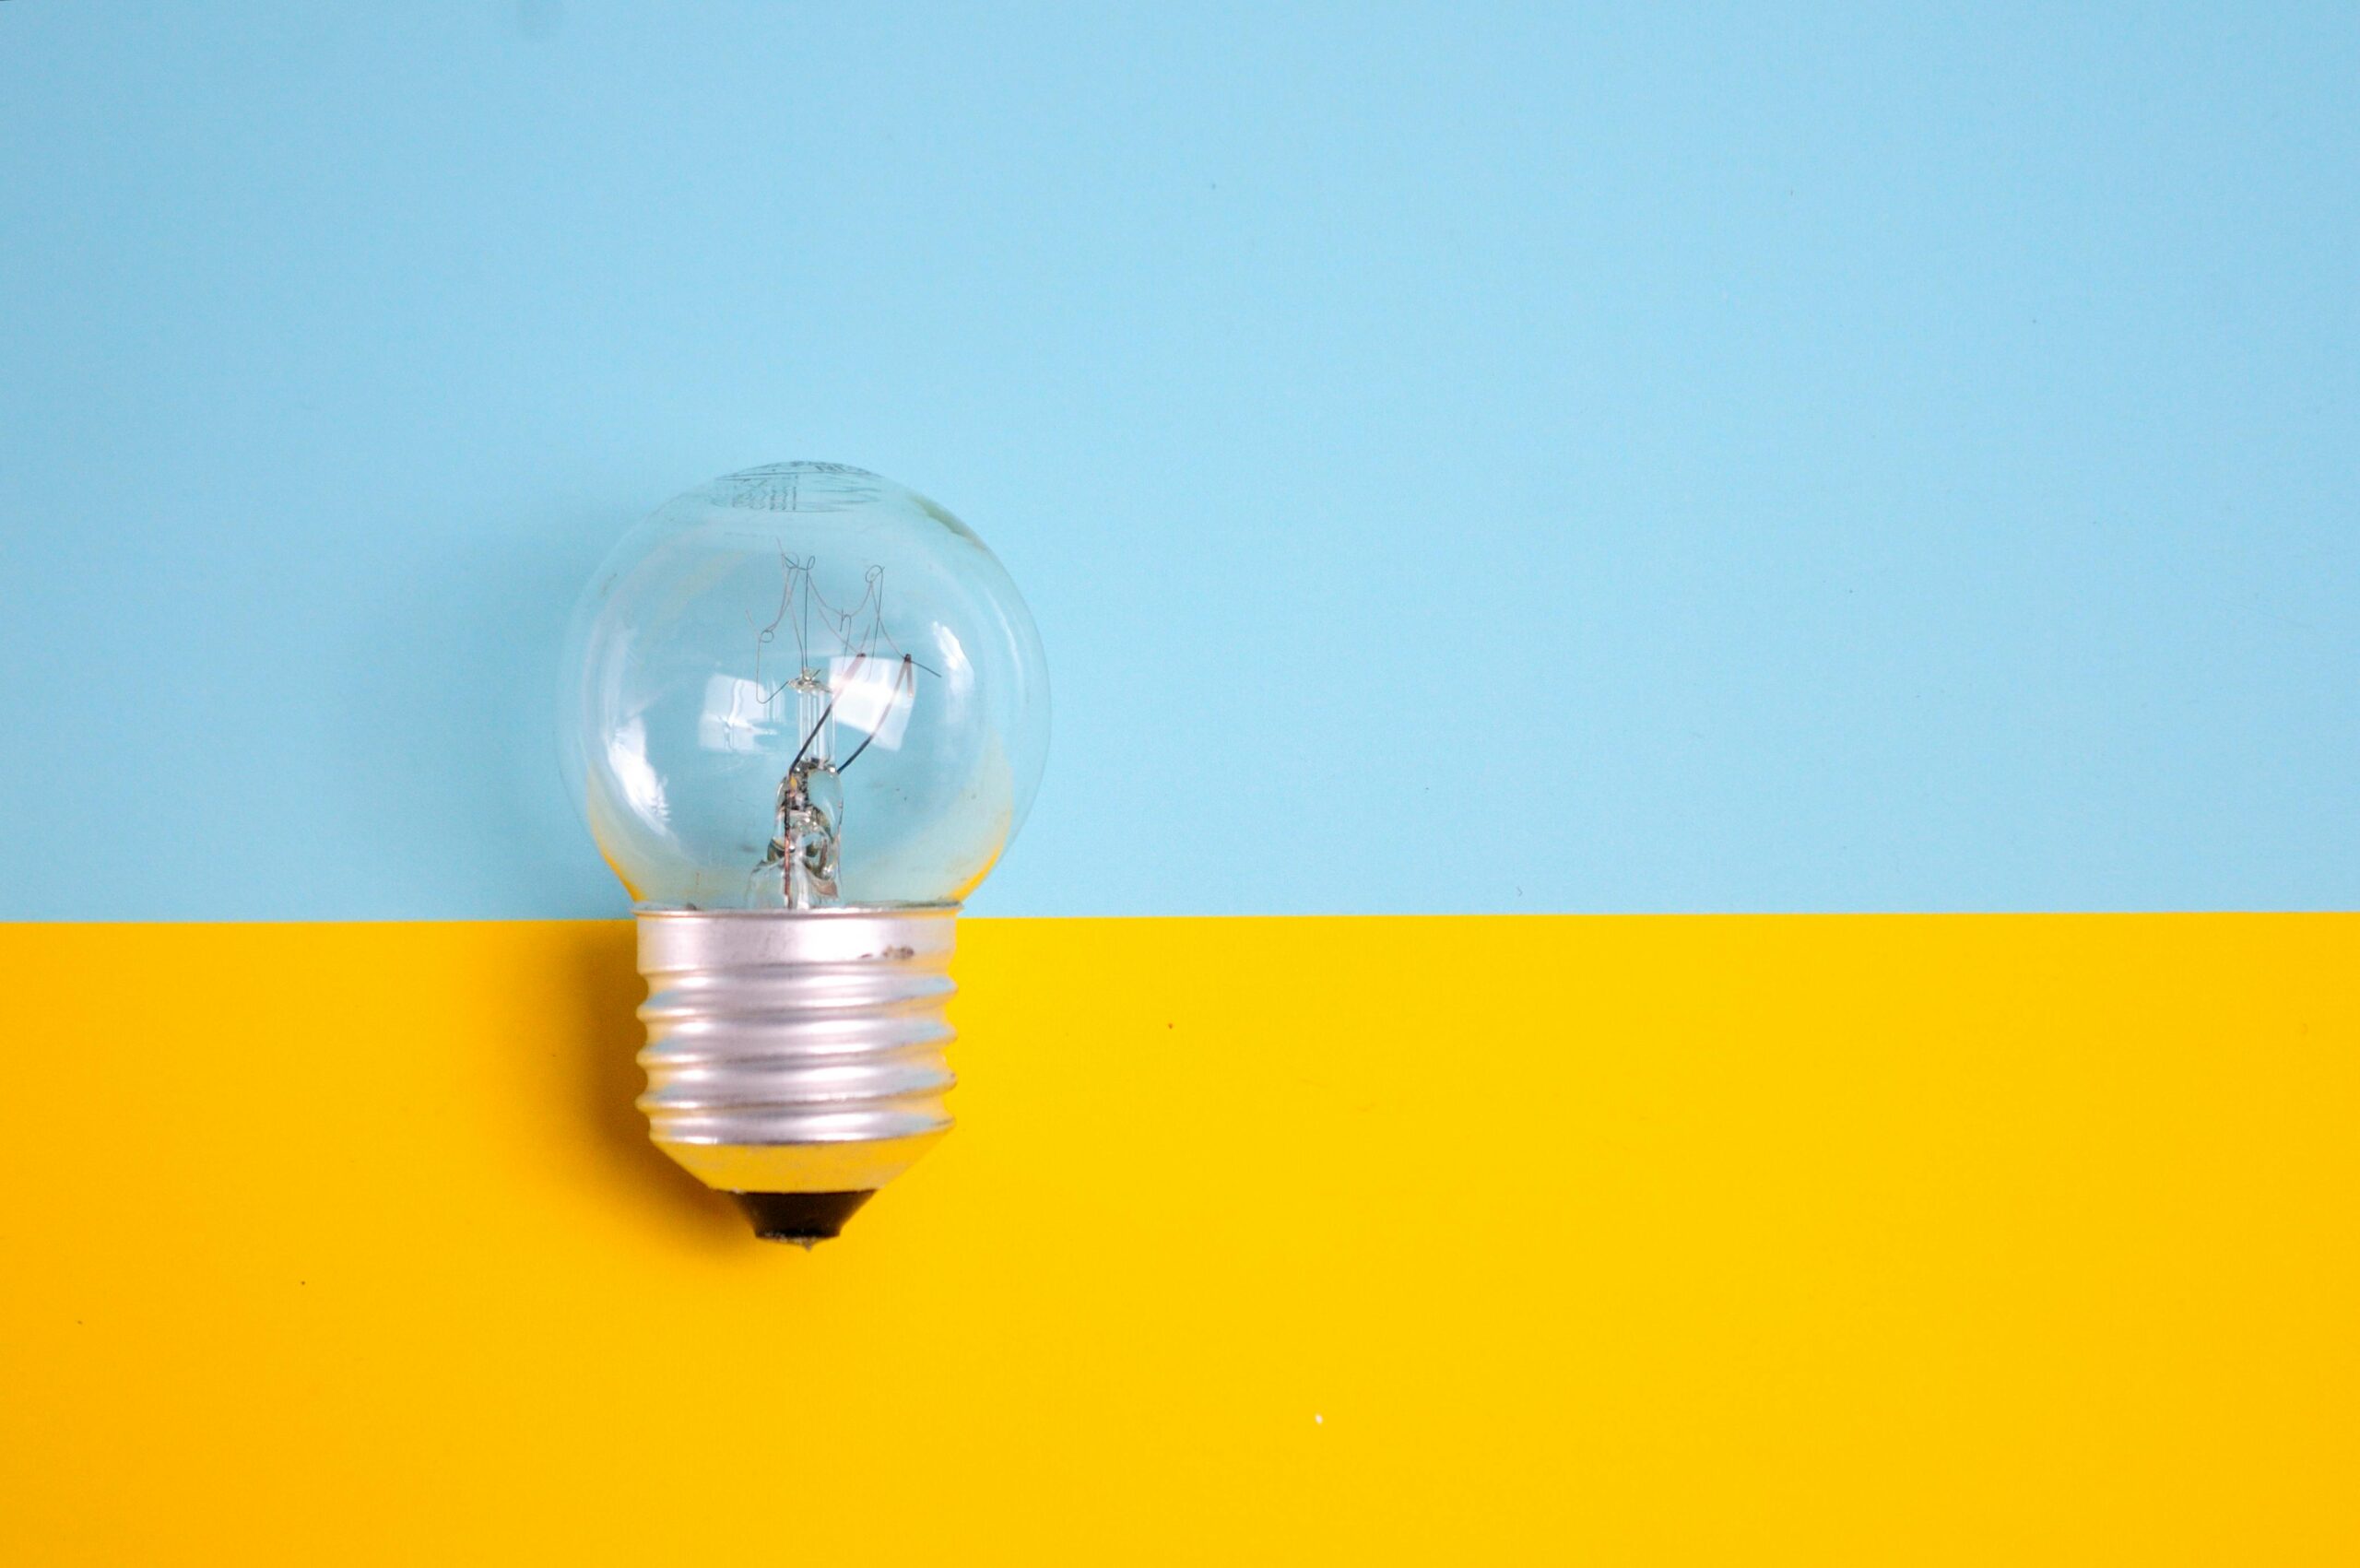 Lightbulb resting on a yellow and blue background for Twenty-Two's website disclaimer